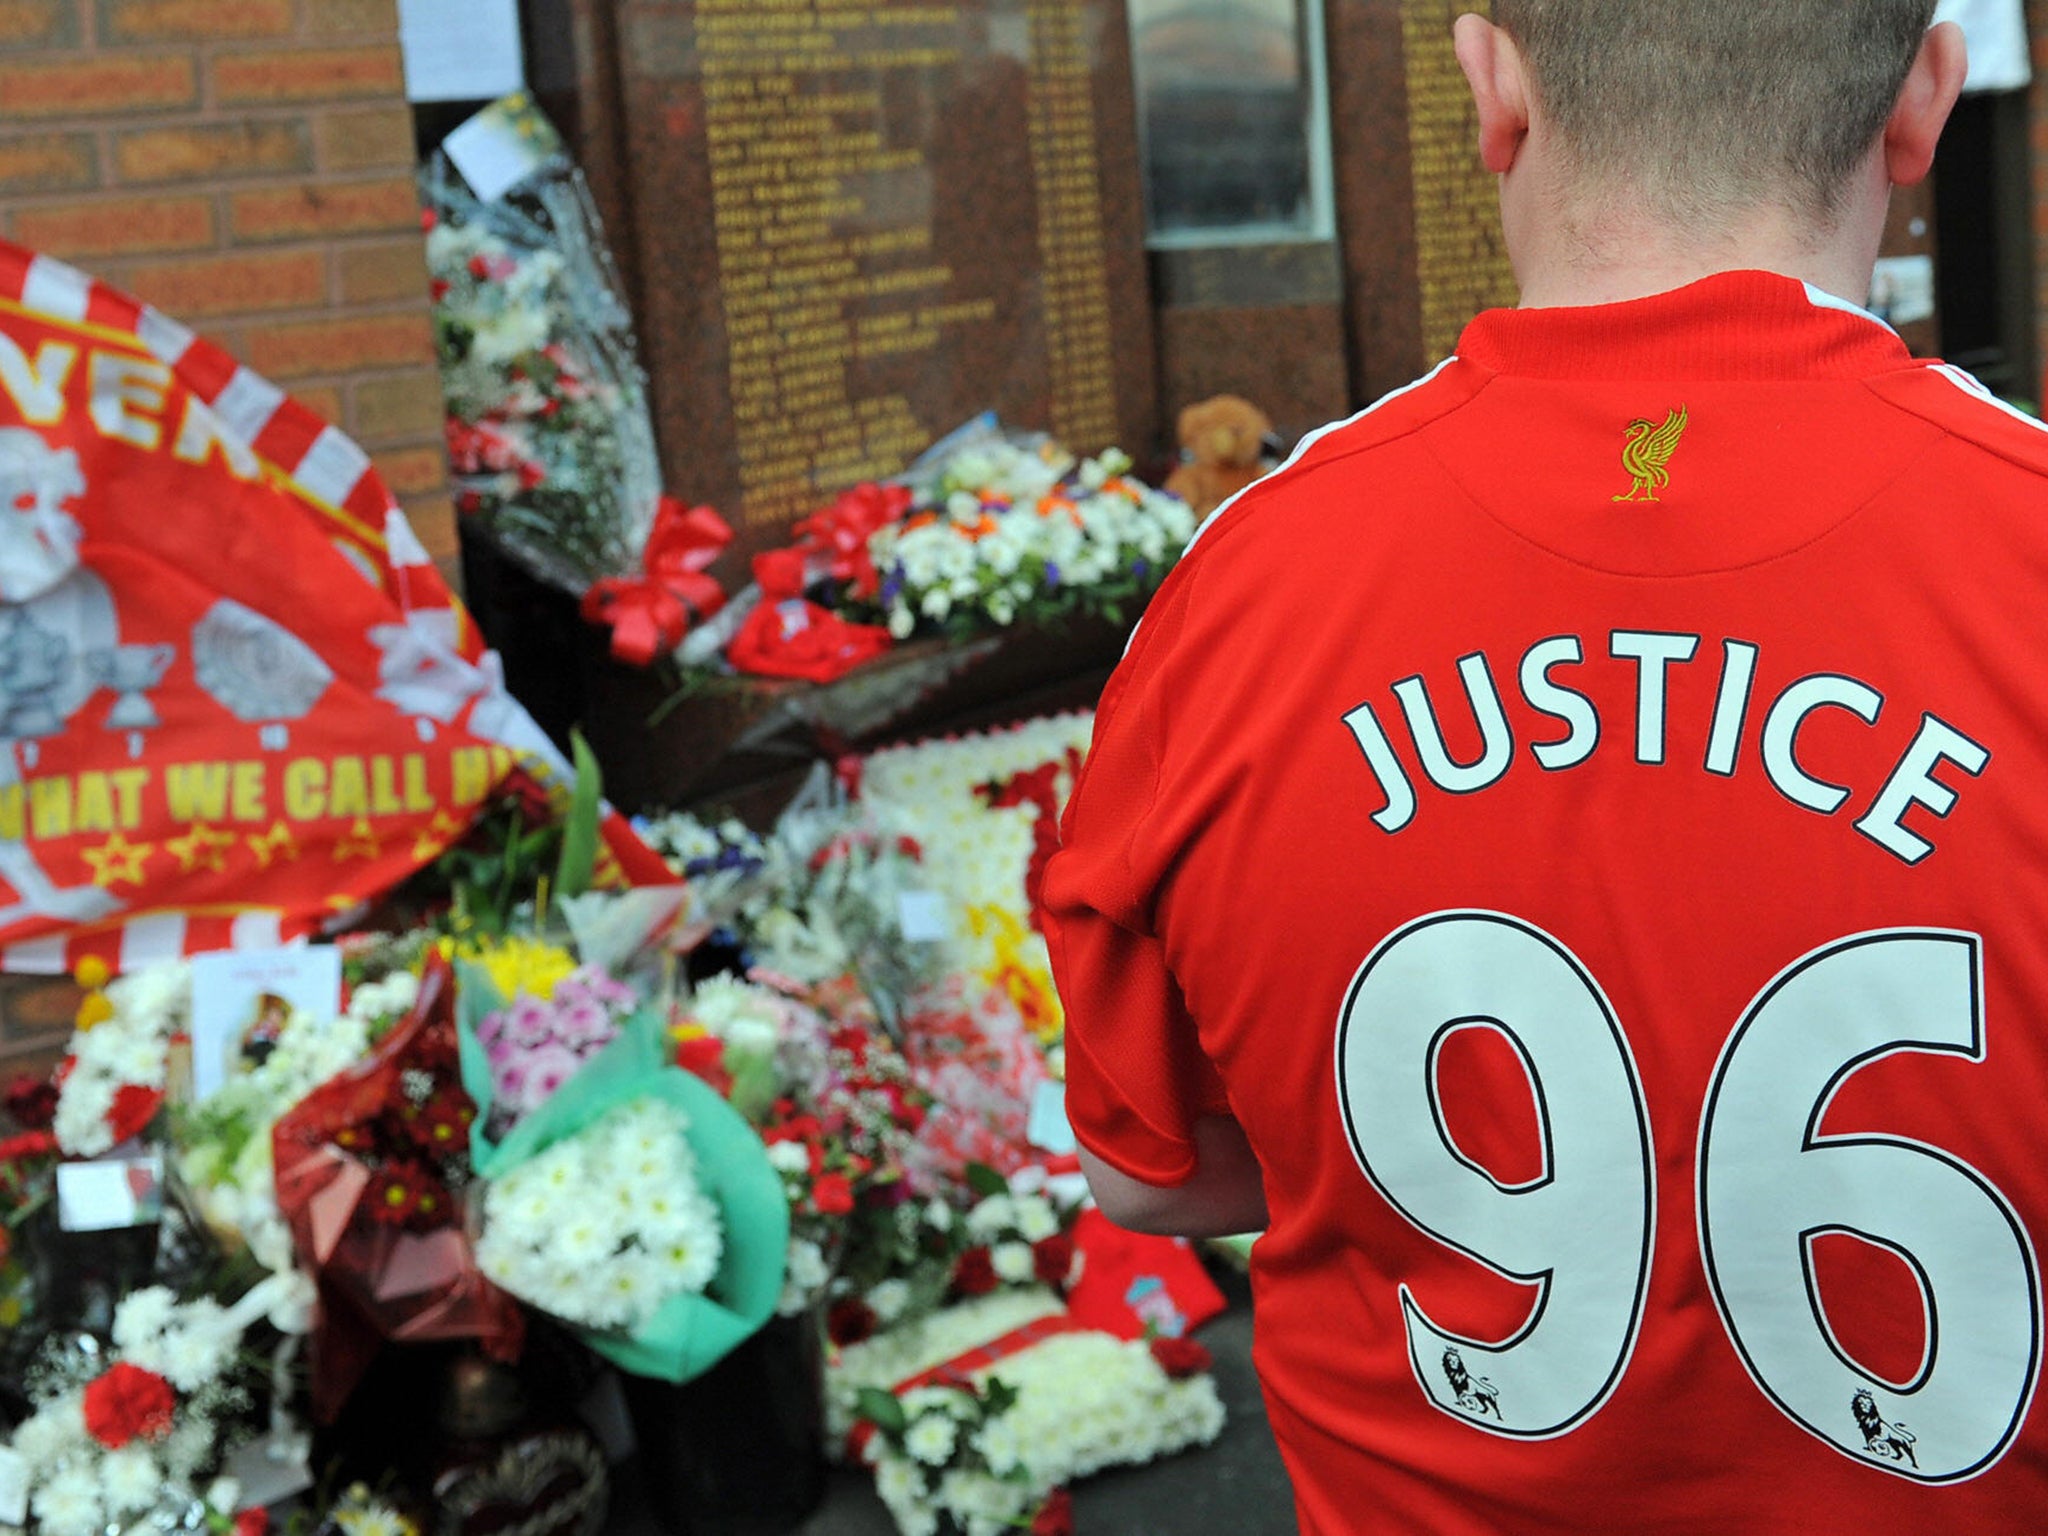 A Liverpool football club supporter looks at floral tributes and memorabilia to Hillsborough